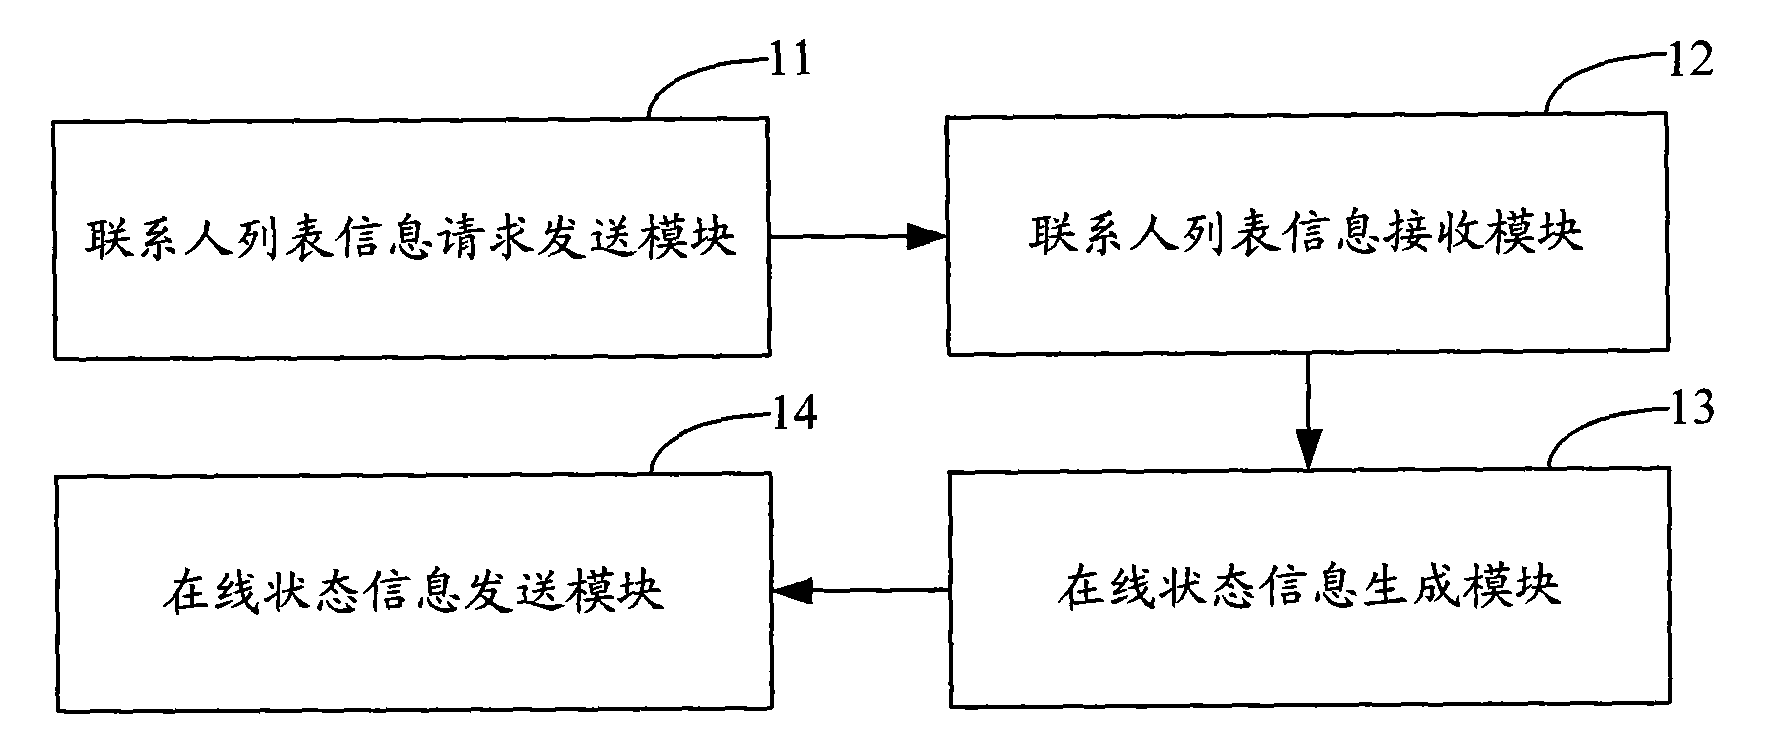 Method for obtaining on-line state of mobile terminal PTT business contact and system